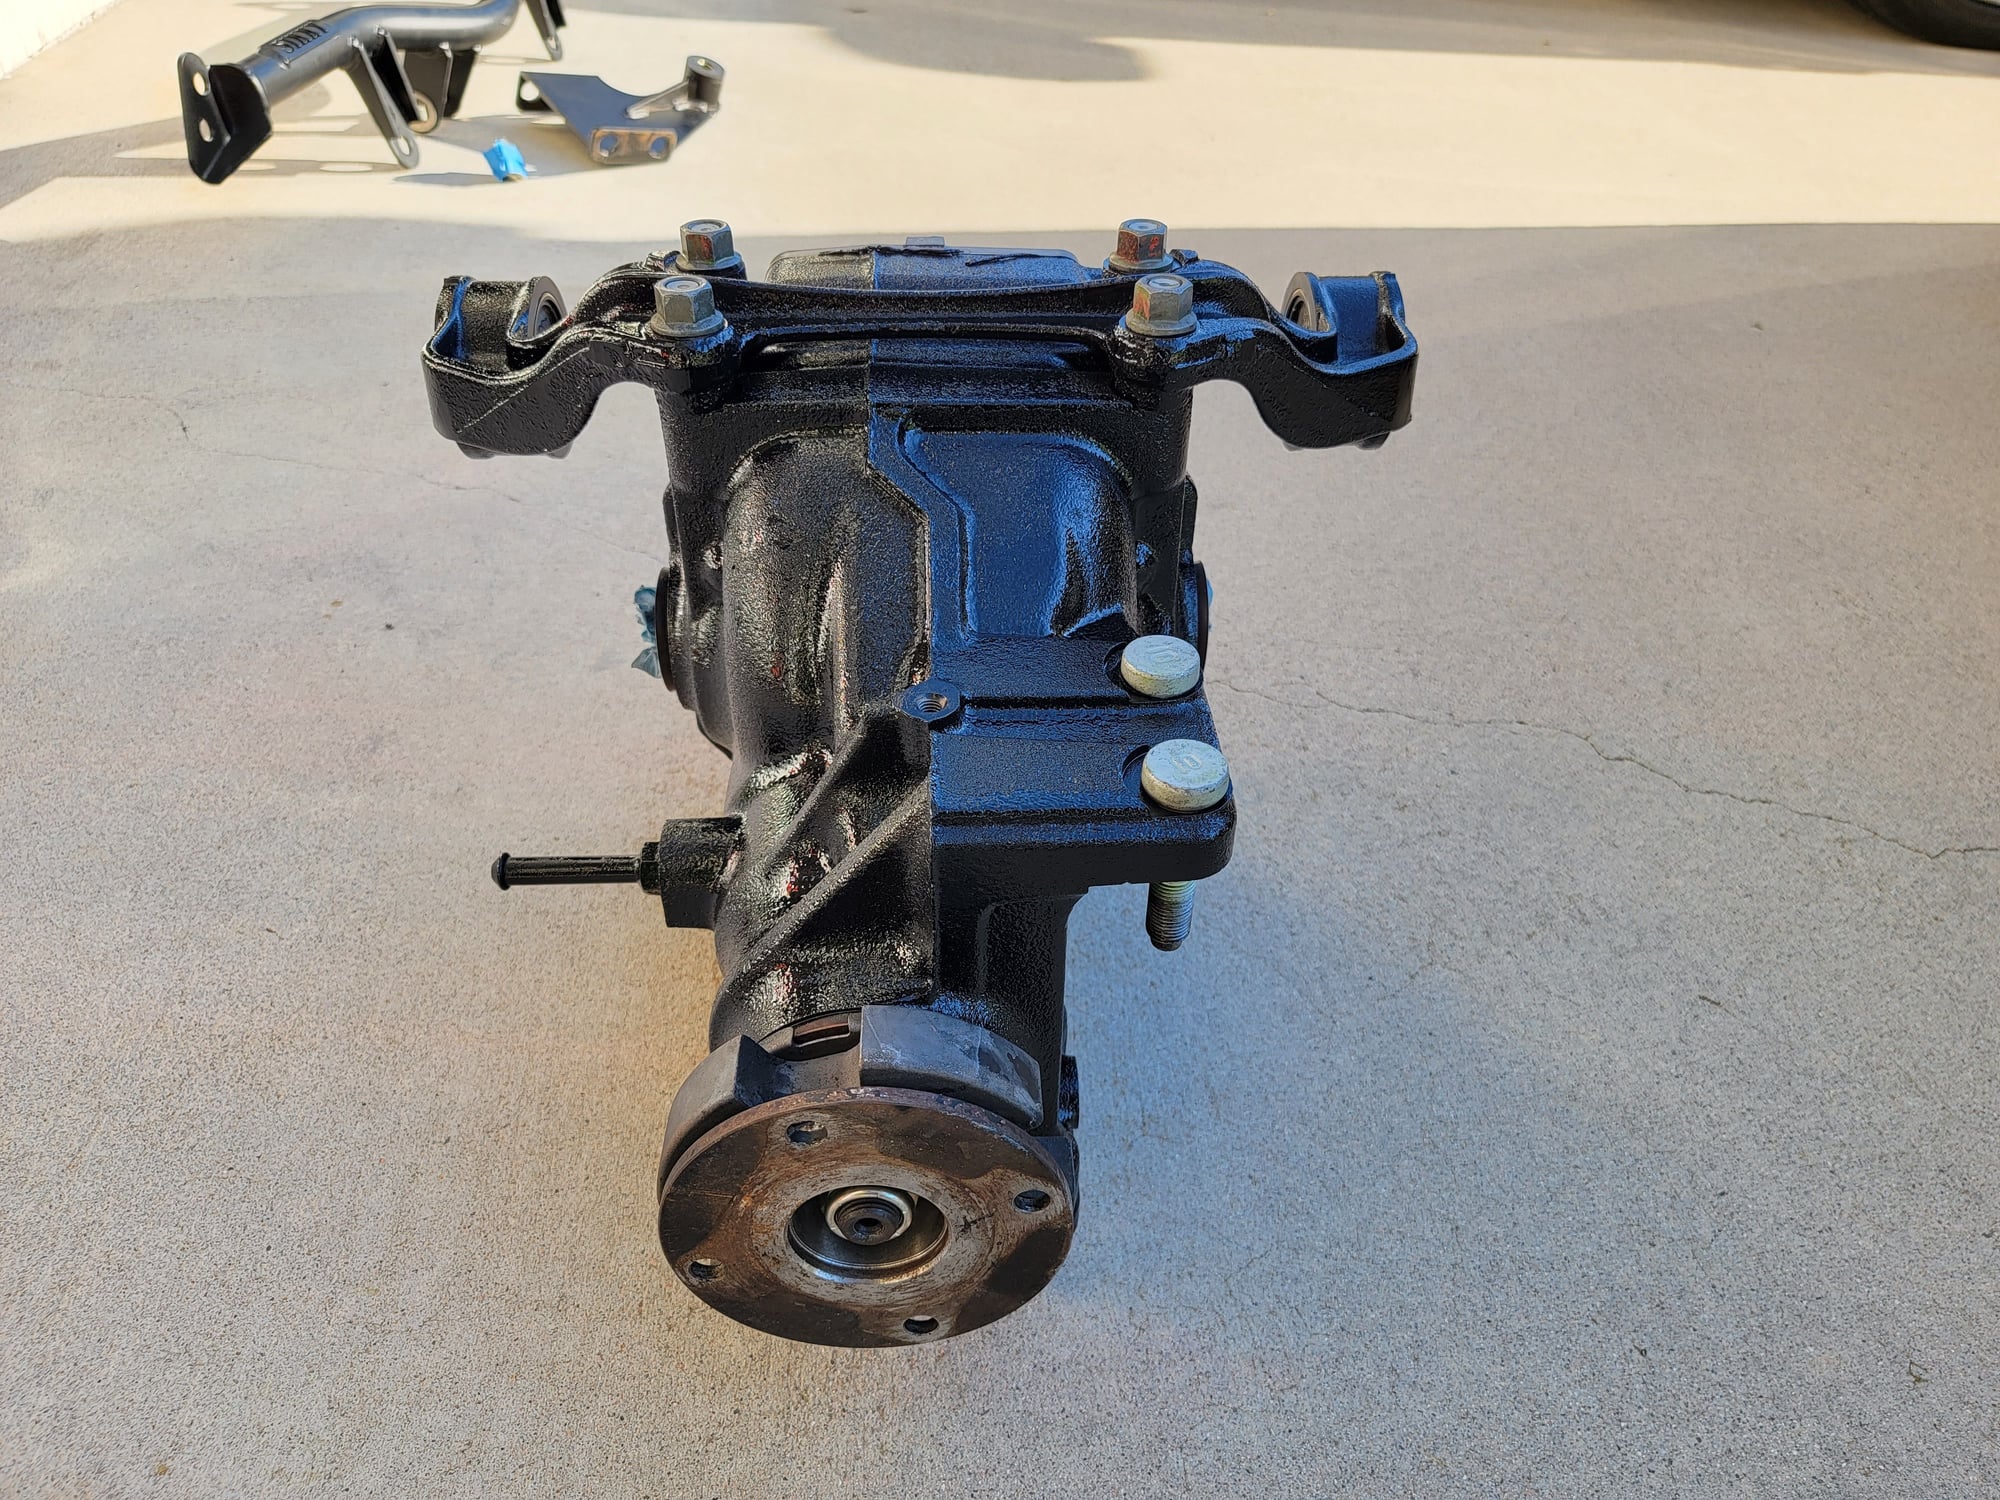 Drivetrain - FD Rear Differential (Torsen LSD & 4.10 final drive) and Axles - Used - 1993 to 2002 Mazda RX-7 - San Clemente, CA 92673, United States